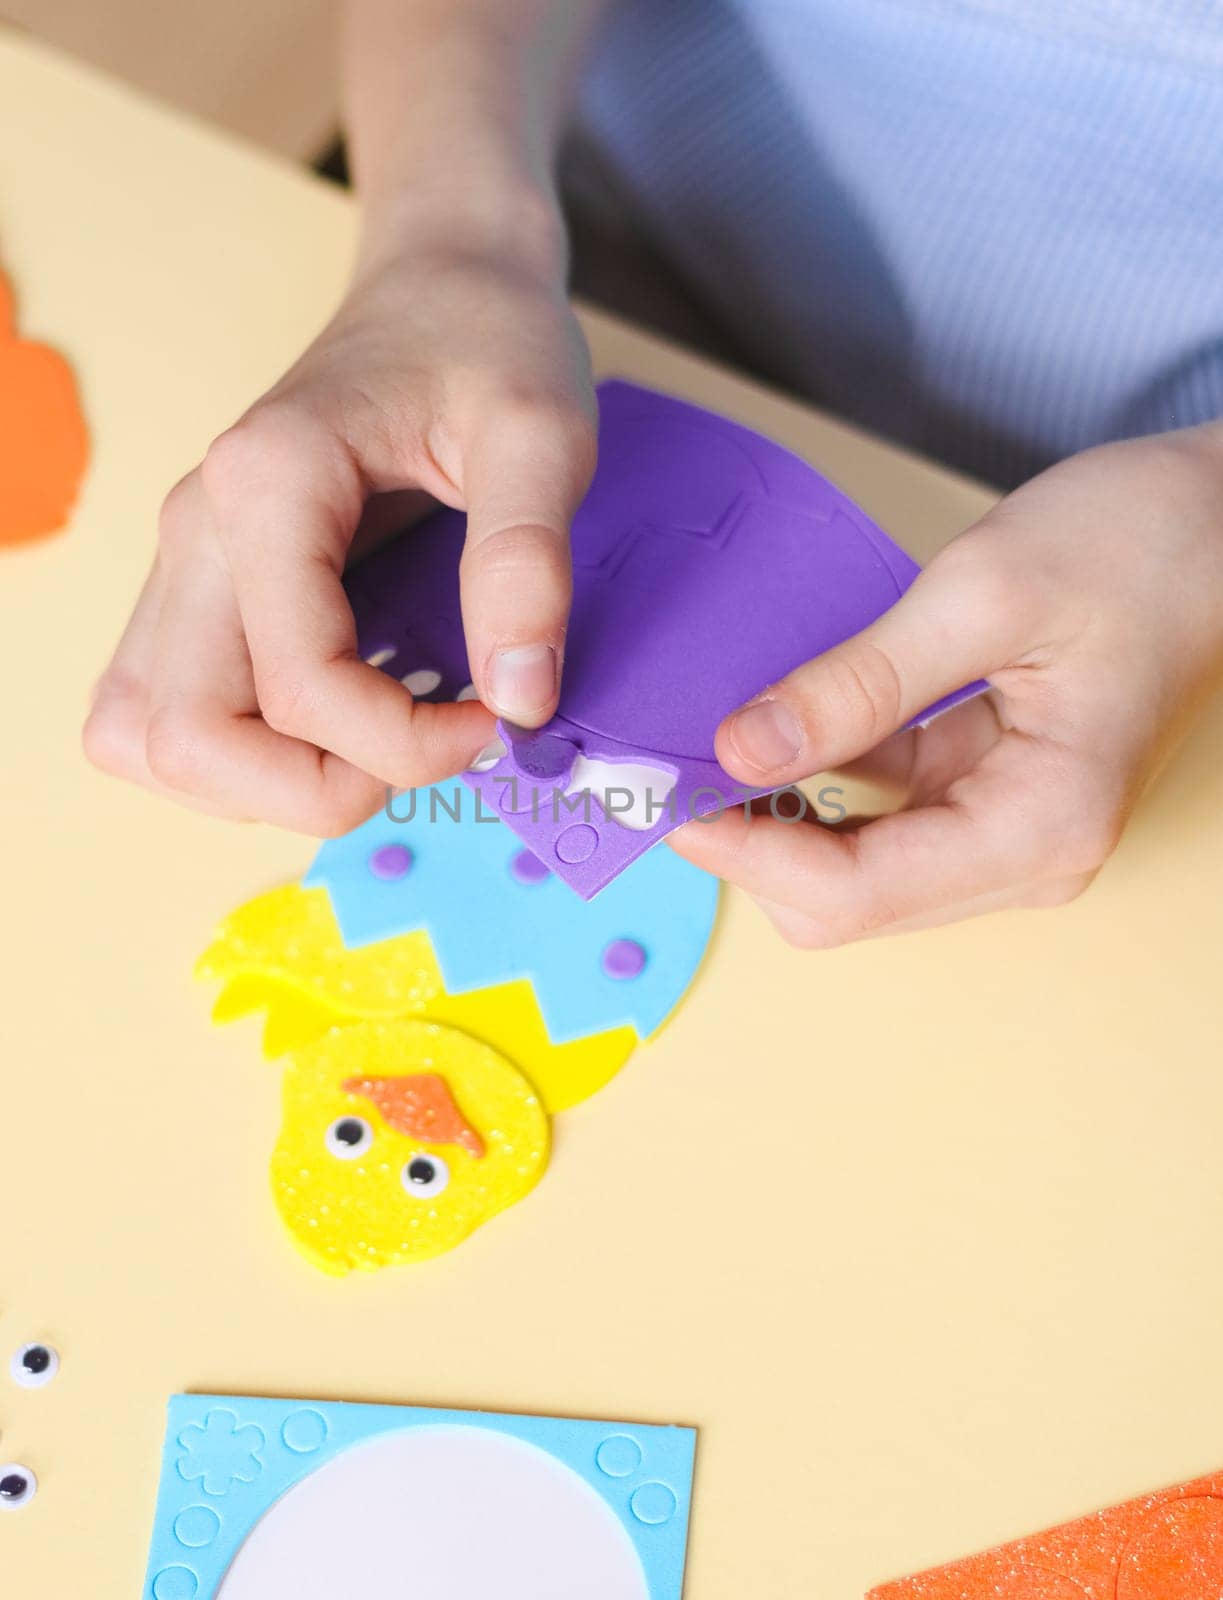 The hands of a caucasian teenage girl peel off a lilac bow sticker with her fingers to stick on a yellow chicken felt, sitting at a children's table with a set of handmade items on a pale yellow background with selective focus, close-up side view. The concept of crafts, diy, needlework, diy, children art, artisanal, Easter preparation,children creative.